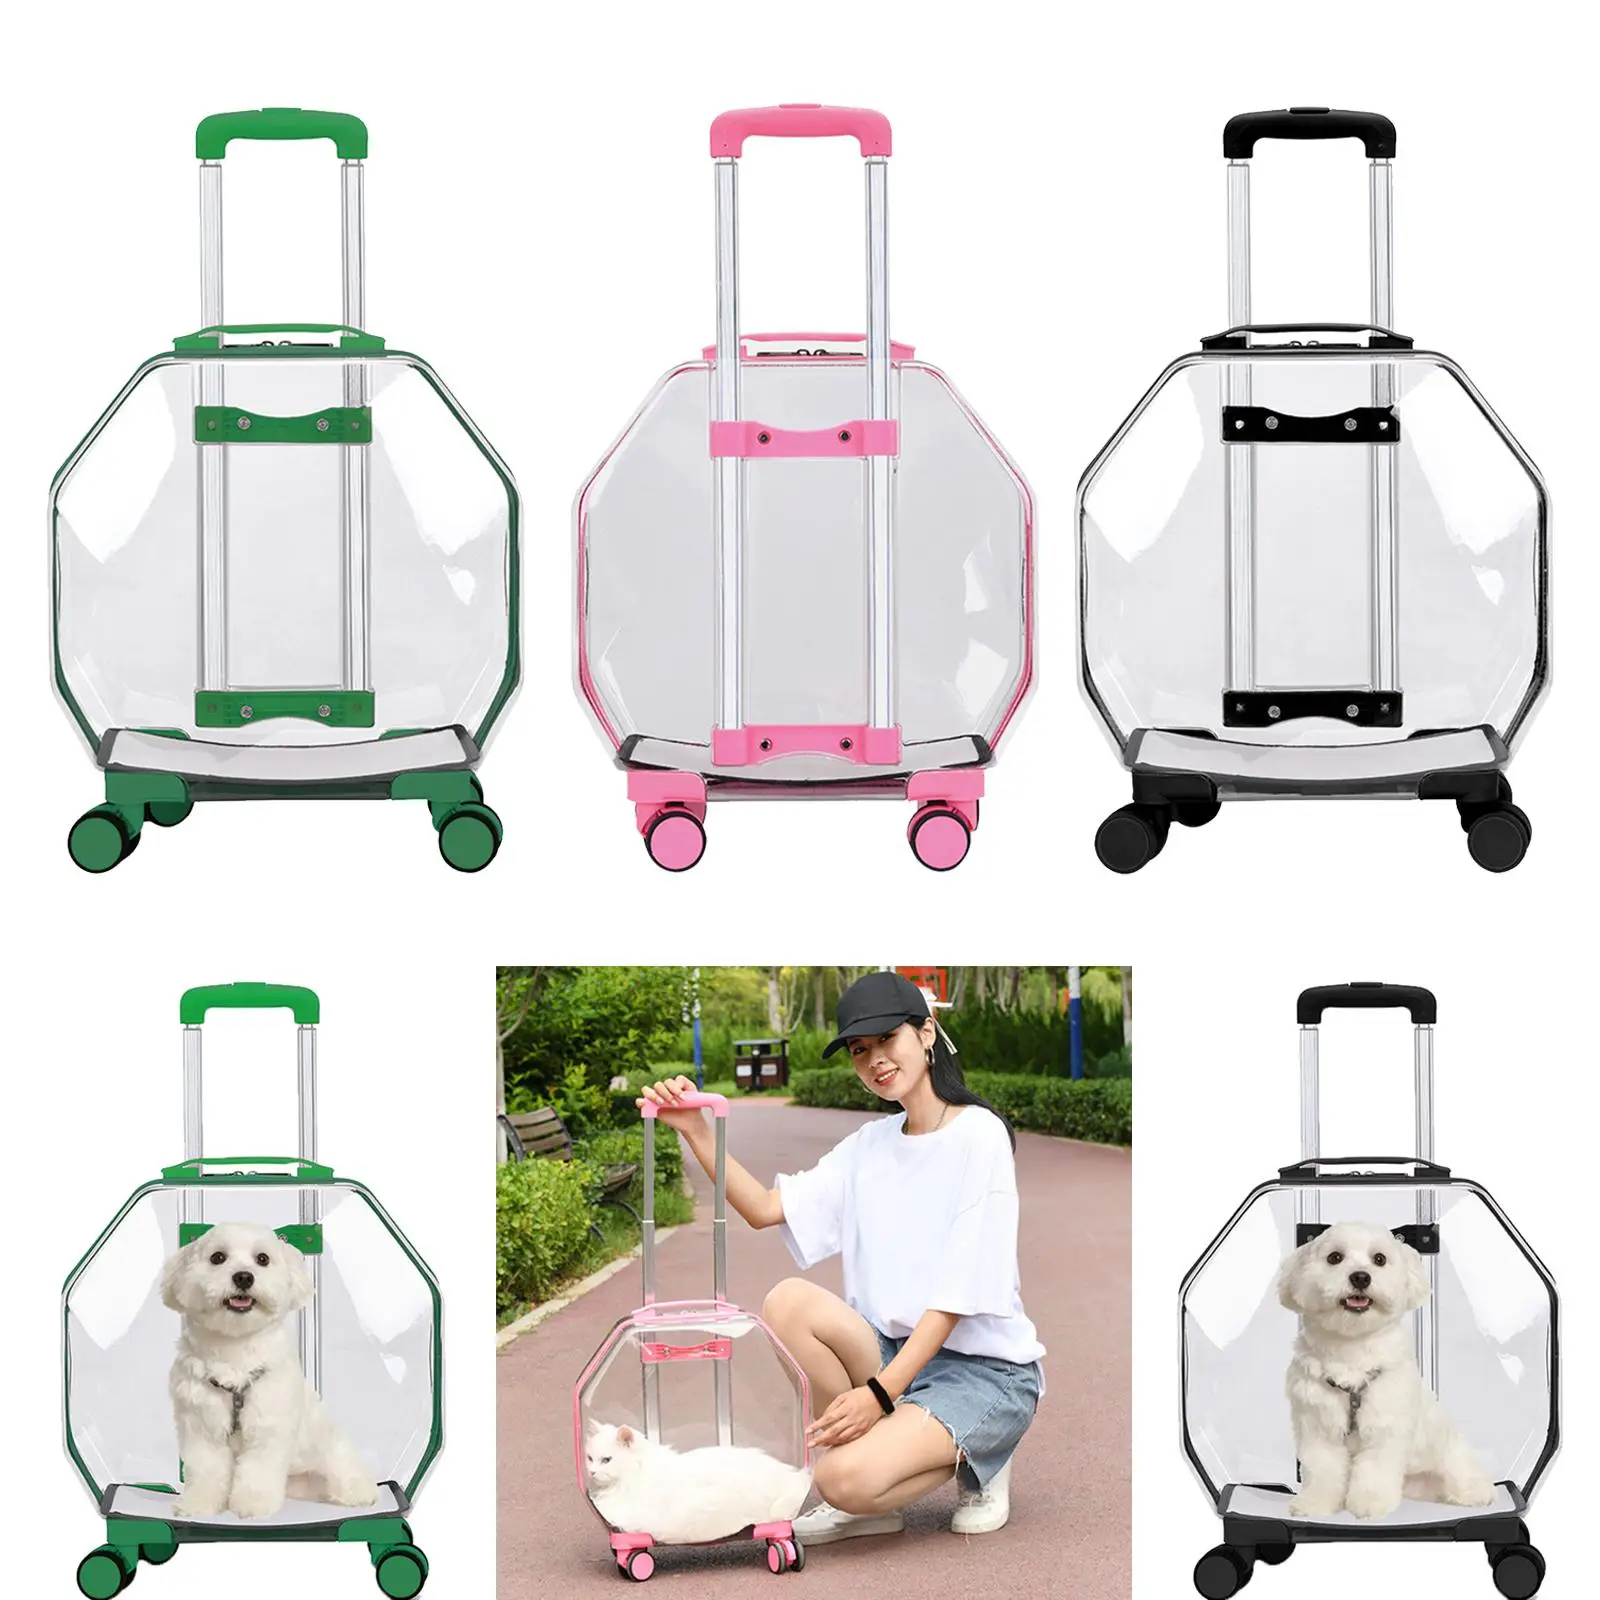  Trolley Case Transparent Luggage Backpack Comfortable Durable Arcylic Breathable Telescopic Transport Bag for Outdoor